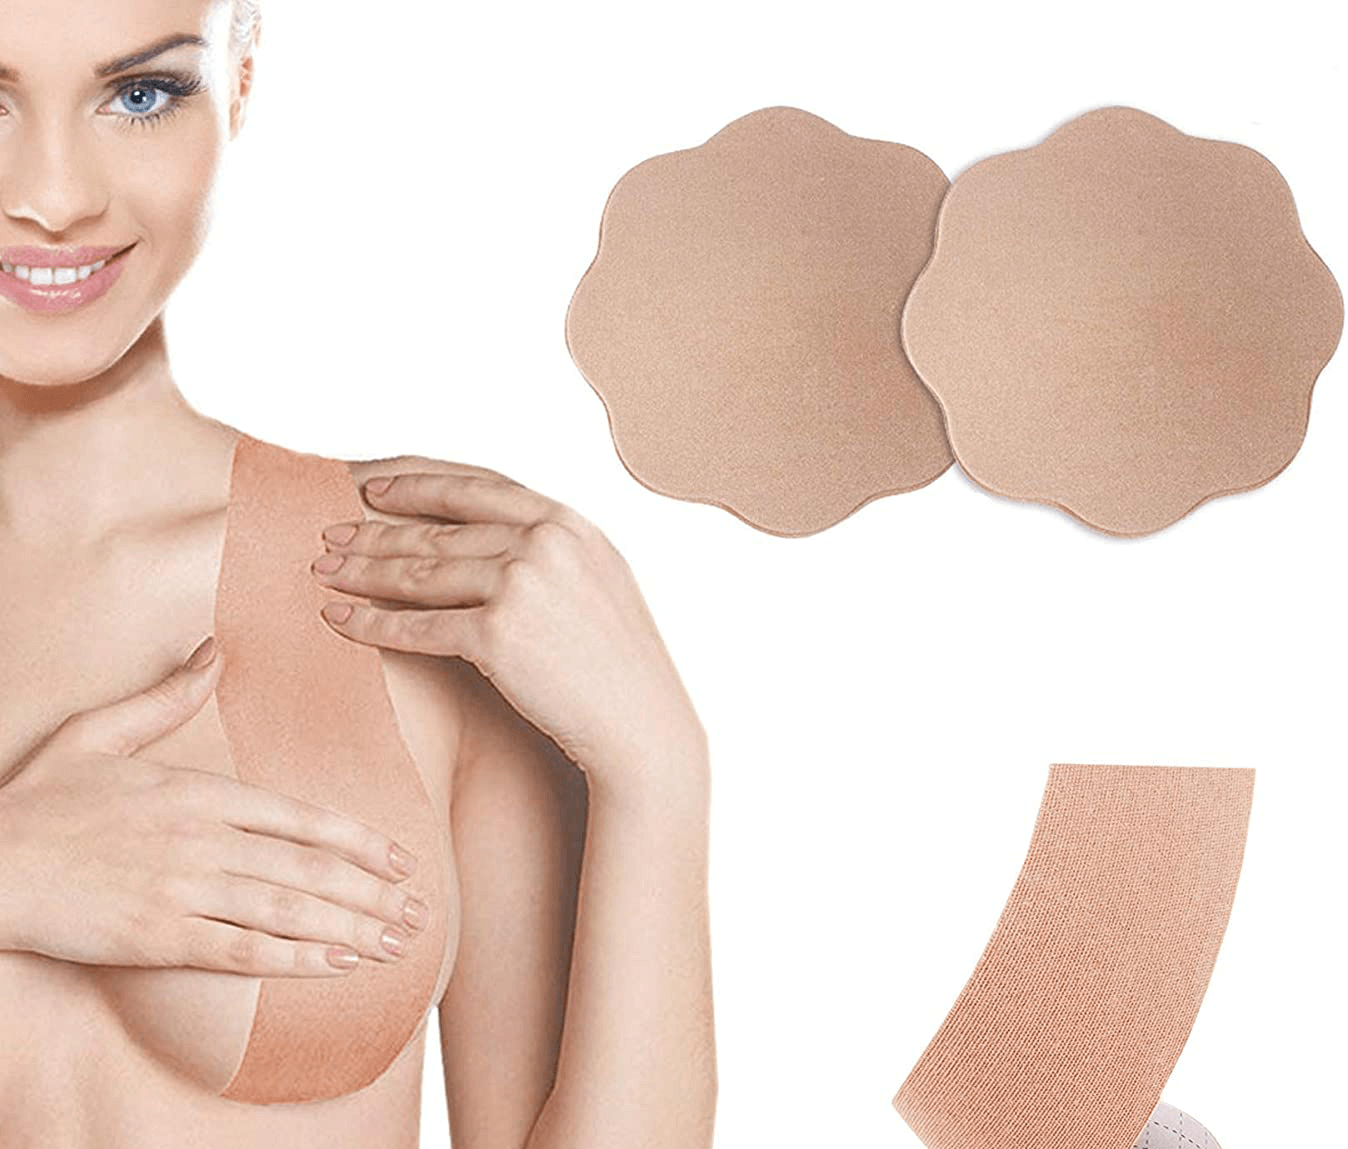 HOW TO TAPE YOUR BOOBS FOR DIFFERENT CLOTHING